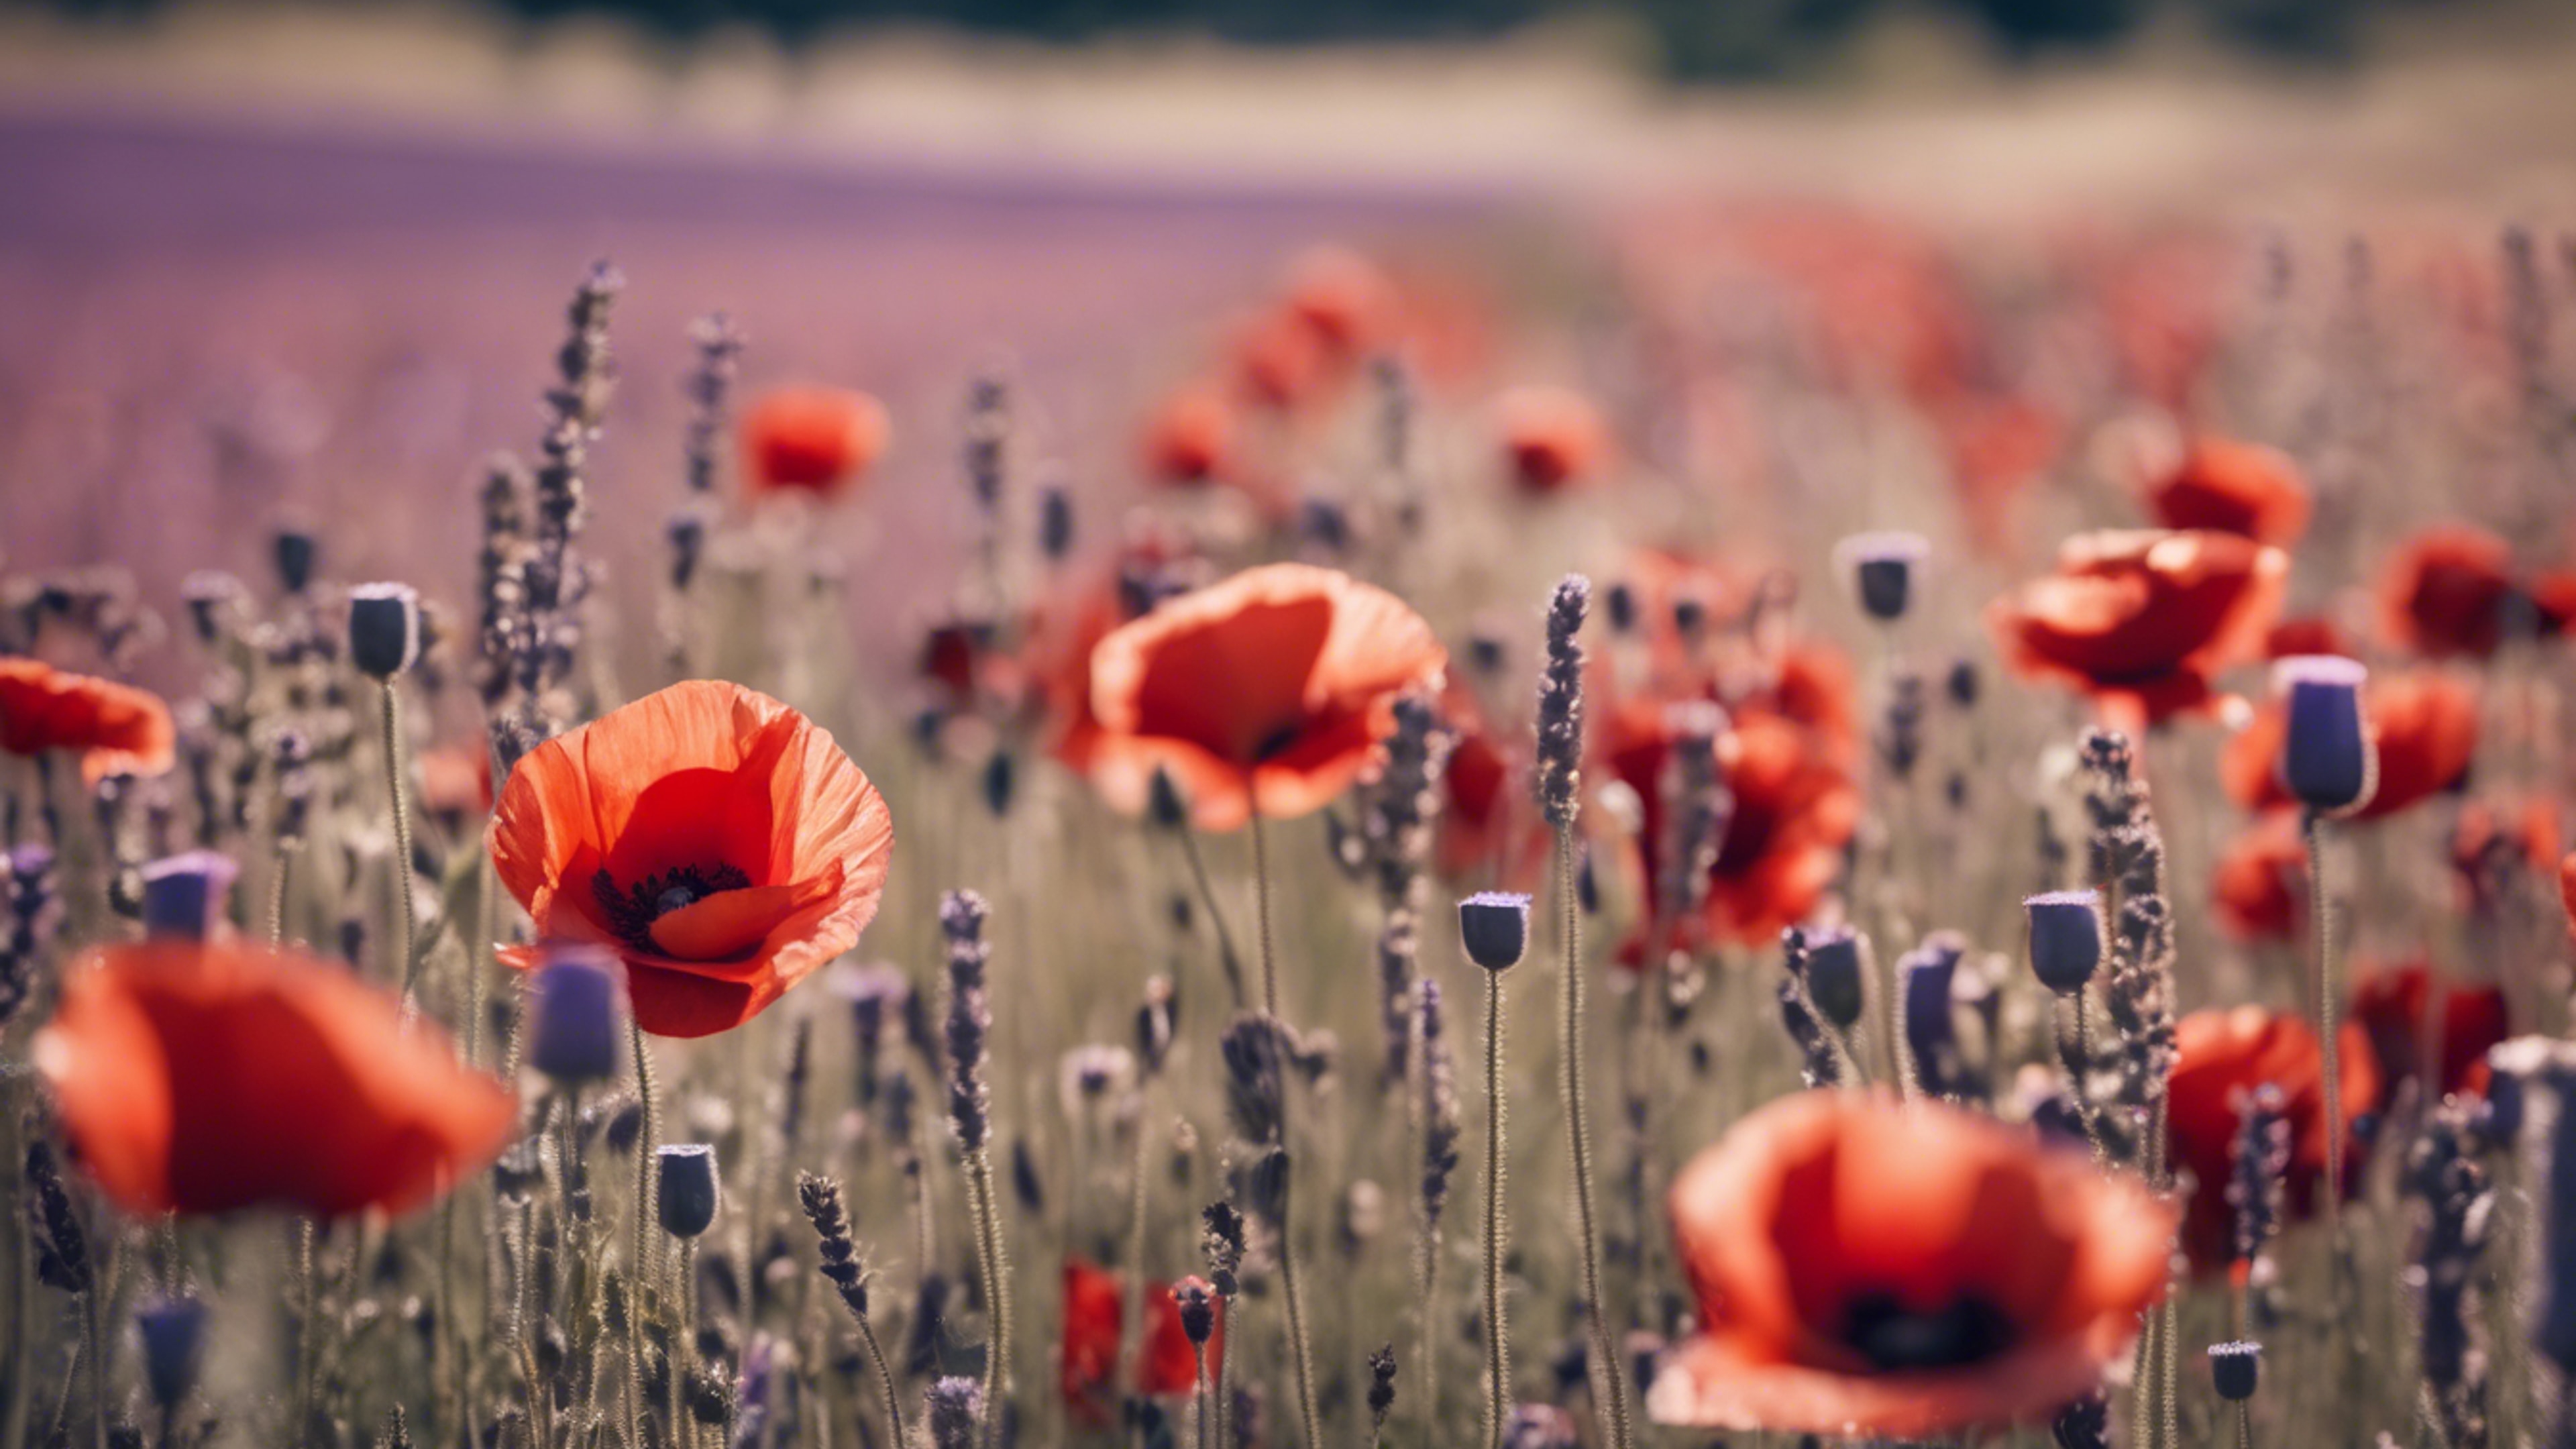 A field of red poppies naturally fading into a lavender field. 벽지[76e938c2507742cfb107]